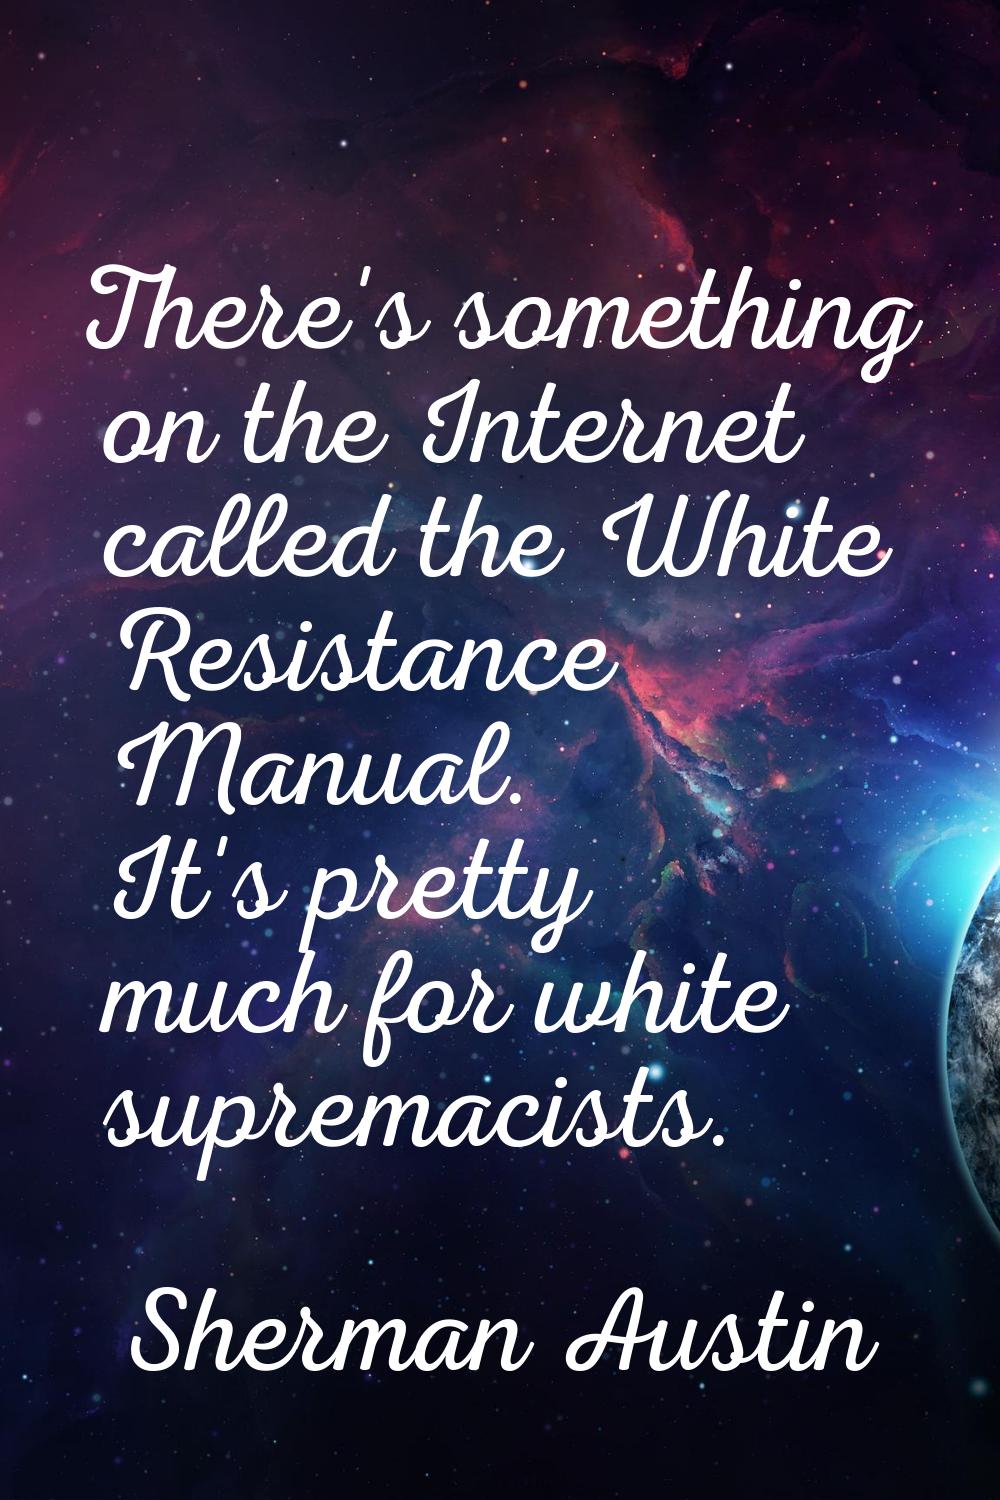 There's something on the Internet called the White Resistance Manual. It's pretty much for white su